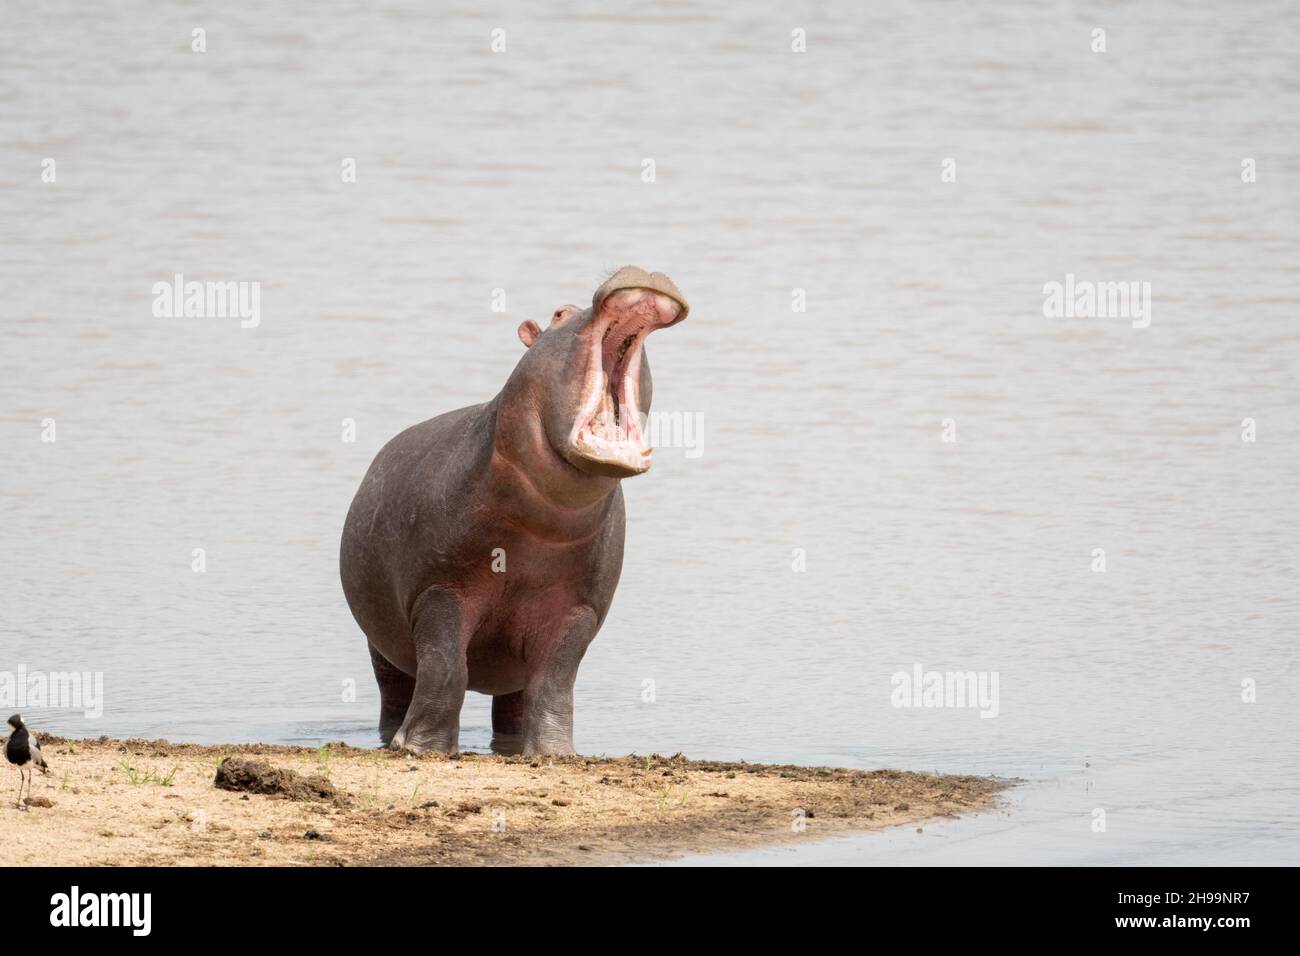 Hippopotamus with its mouth open on the edge of a lake in Sabi Sands Game Reserve in South Africa Stock Photo